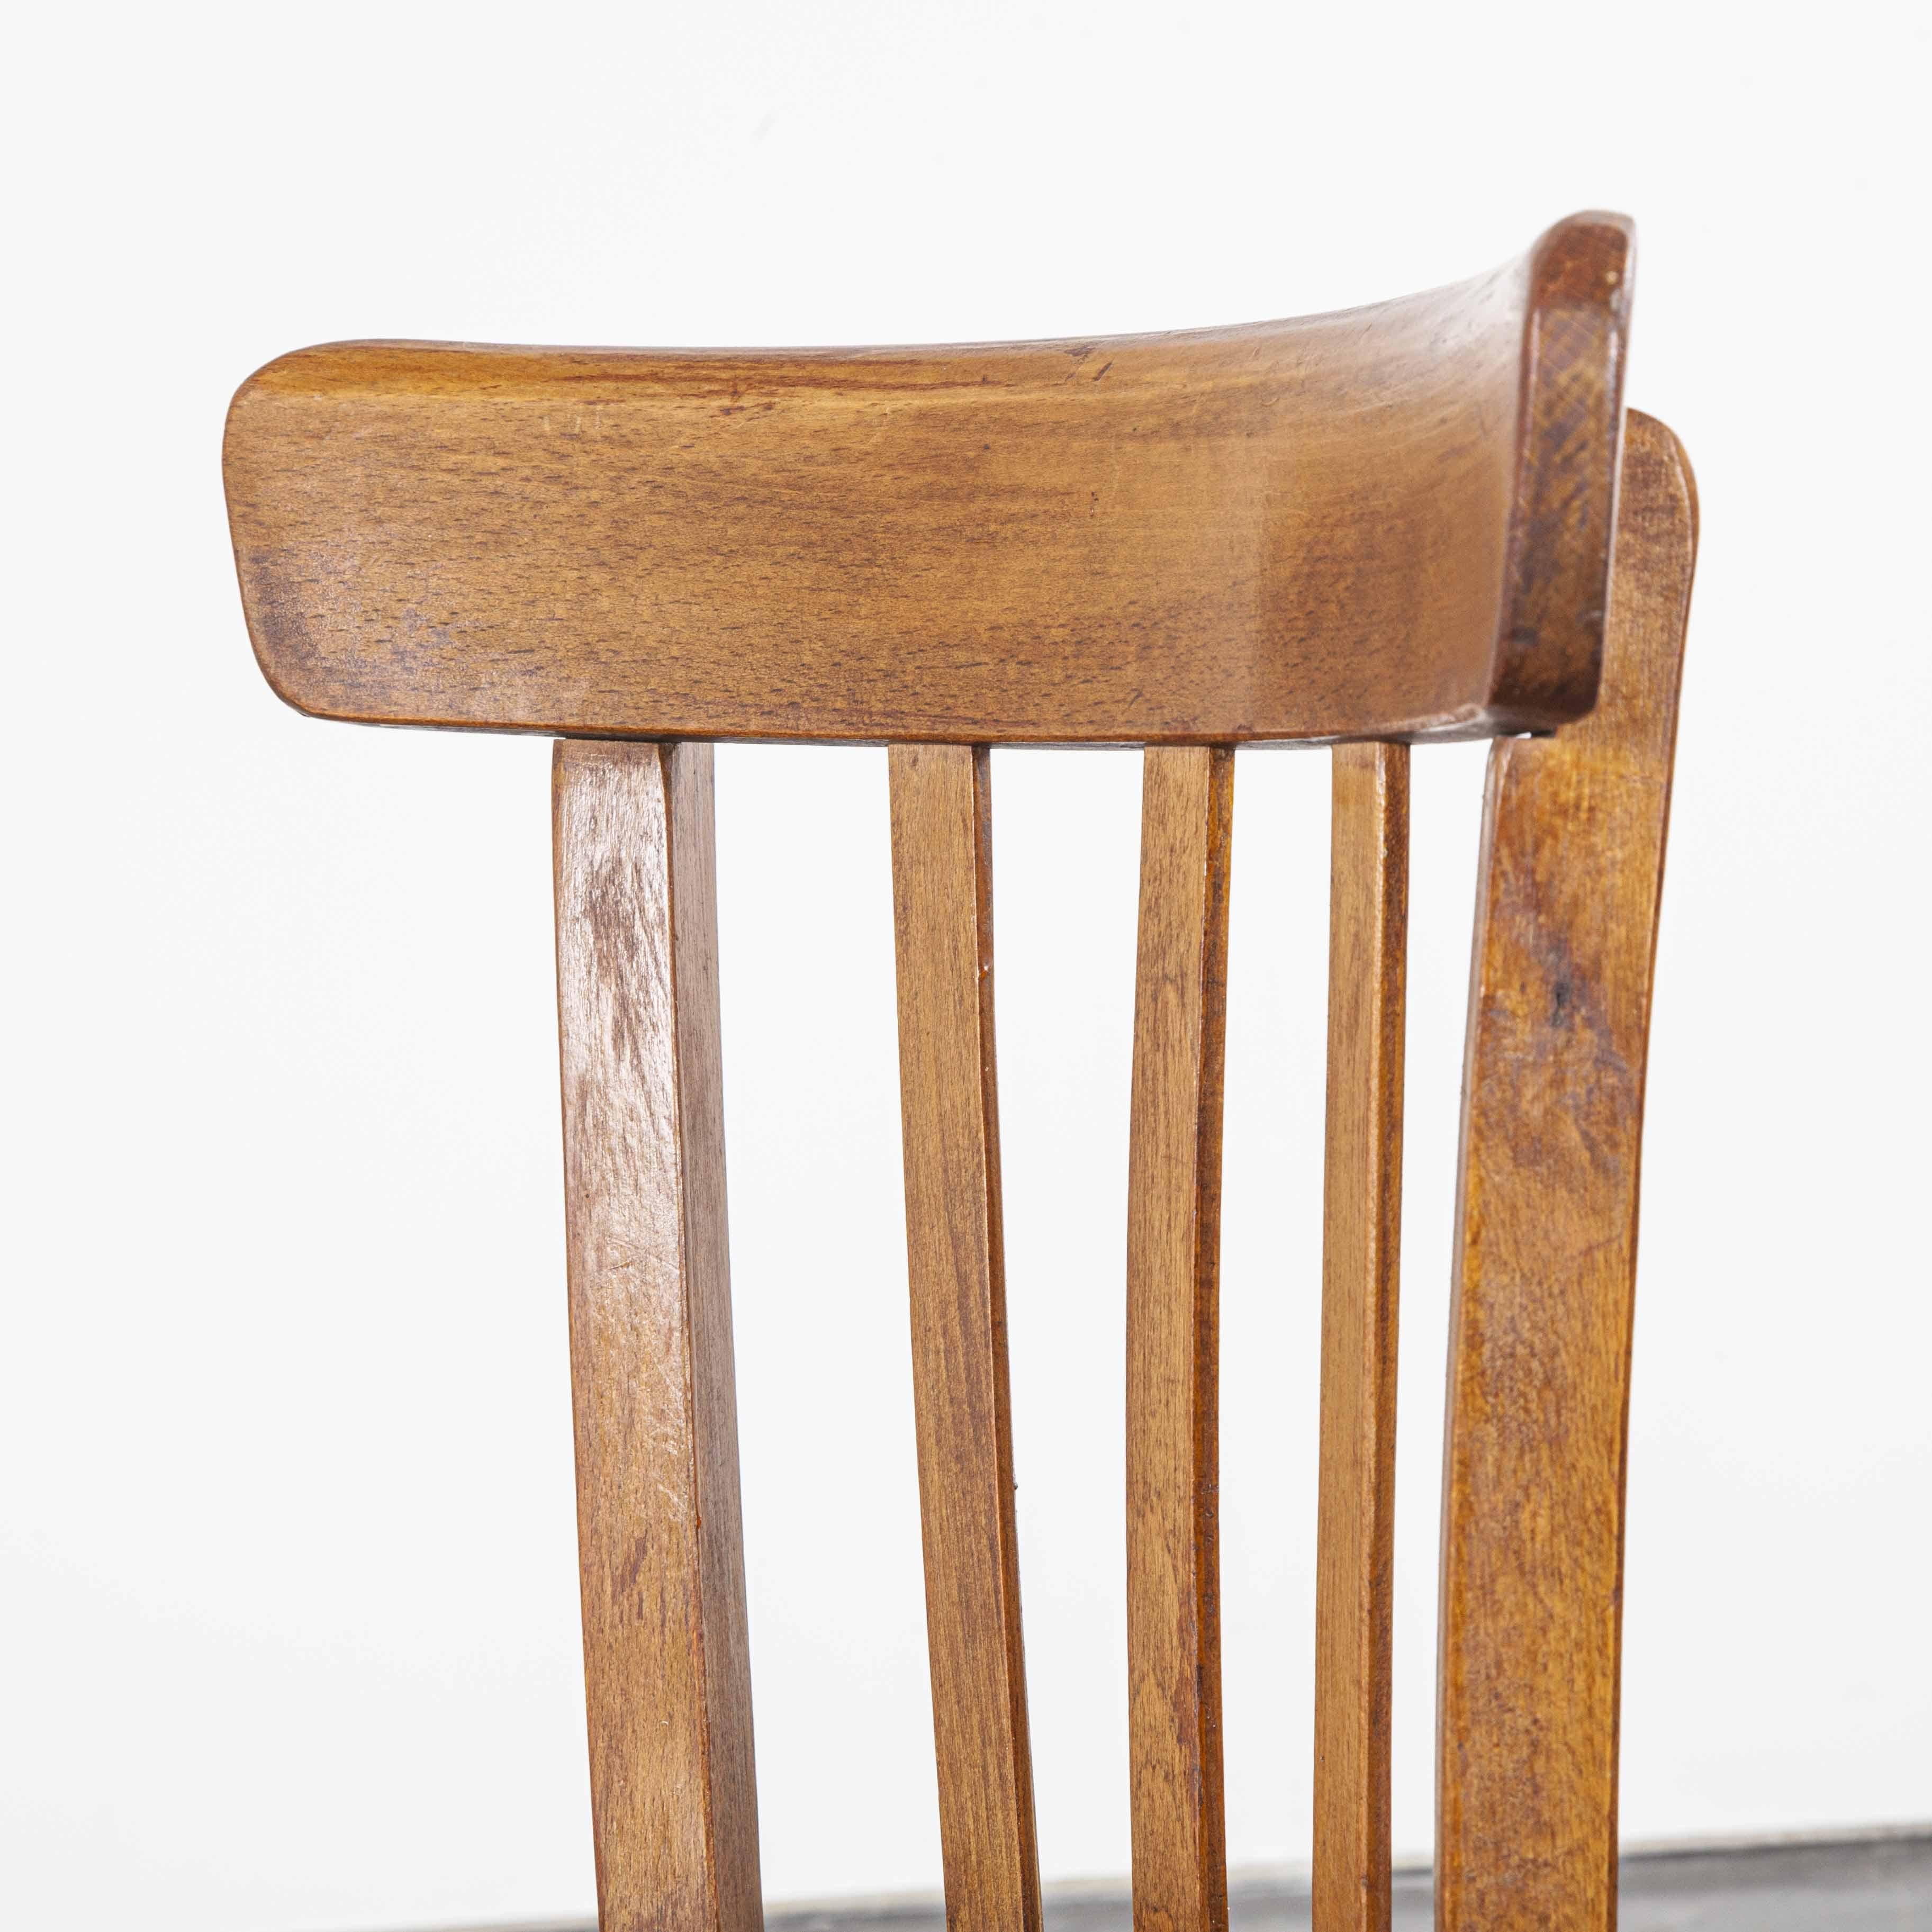 1950s Baumann bentwood bistro dining chair – Model 2 – set of eight. Classic beech bistro chair made in France by the maker Joamin Baumann. Baumann is a slightly off the radar French producer just starting to gain traction in the market. Baumann was